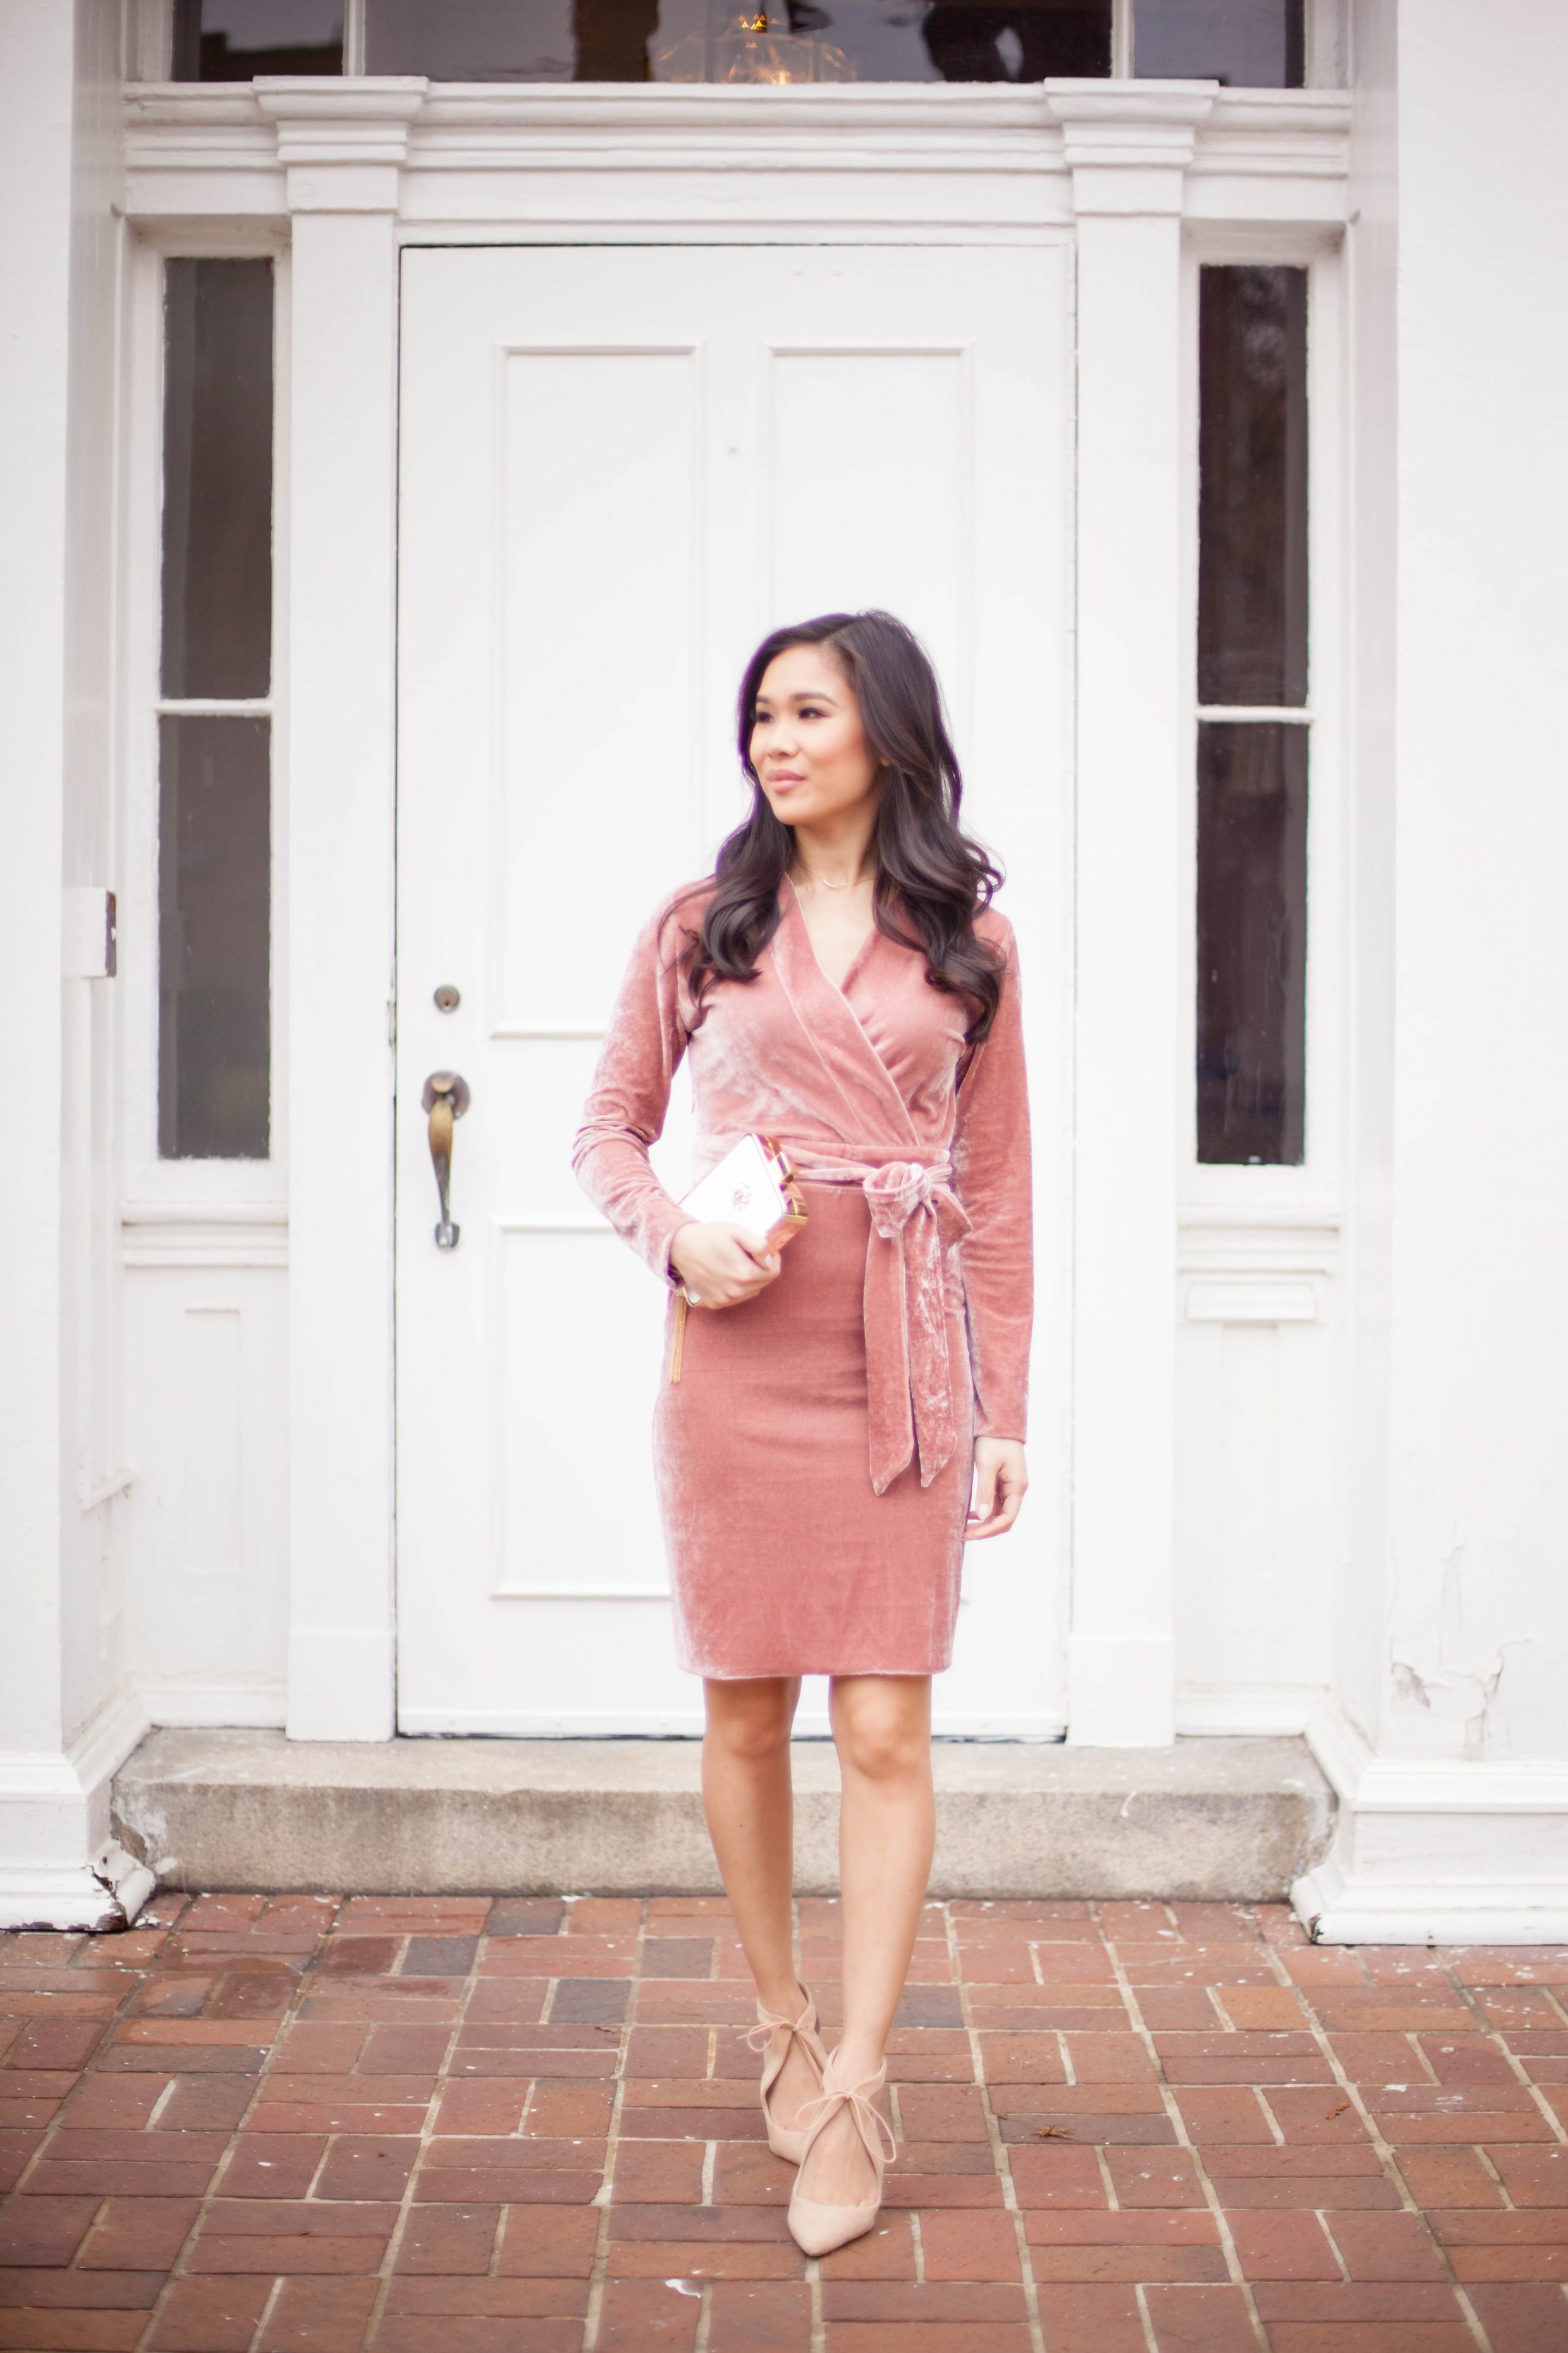 Blogger Hoang-Kim wears a velvet wrap dress from Chicwish for Valentine's Day